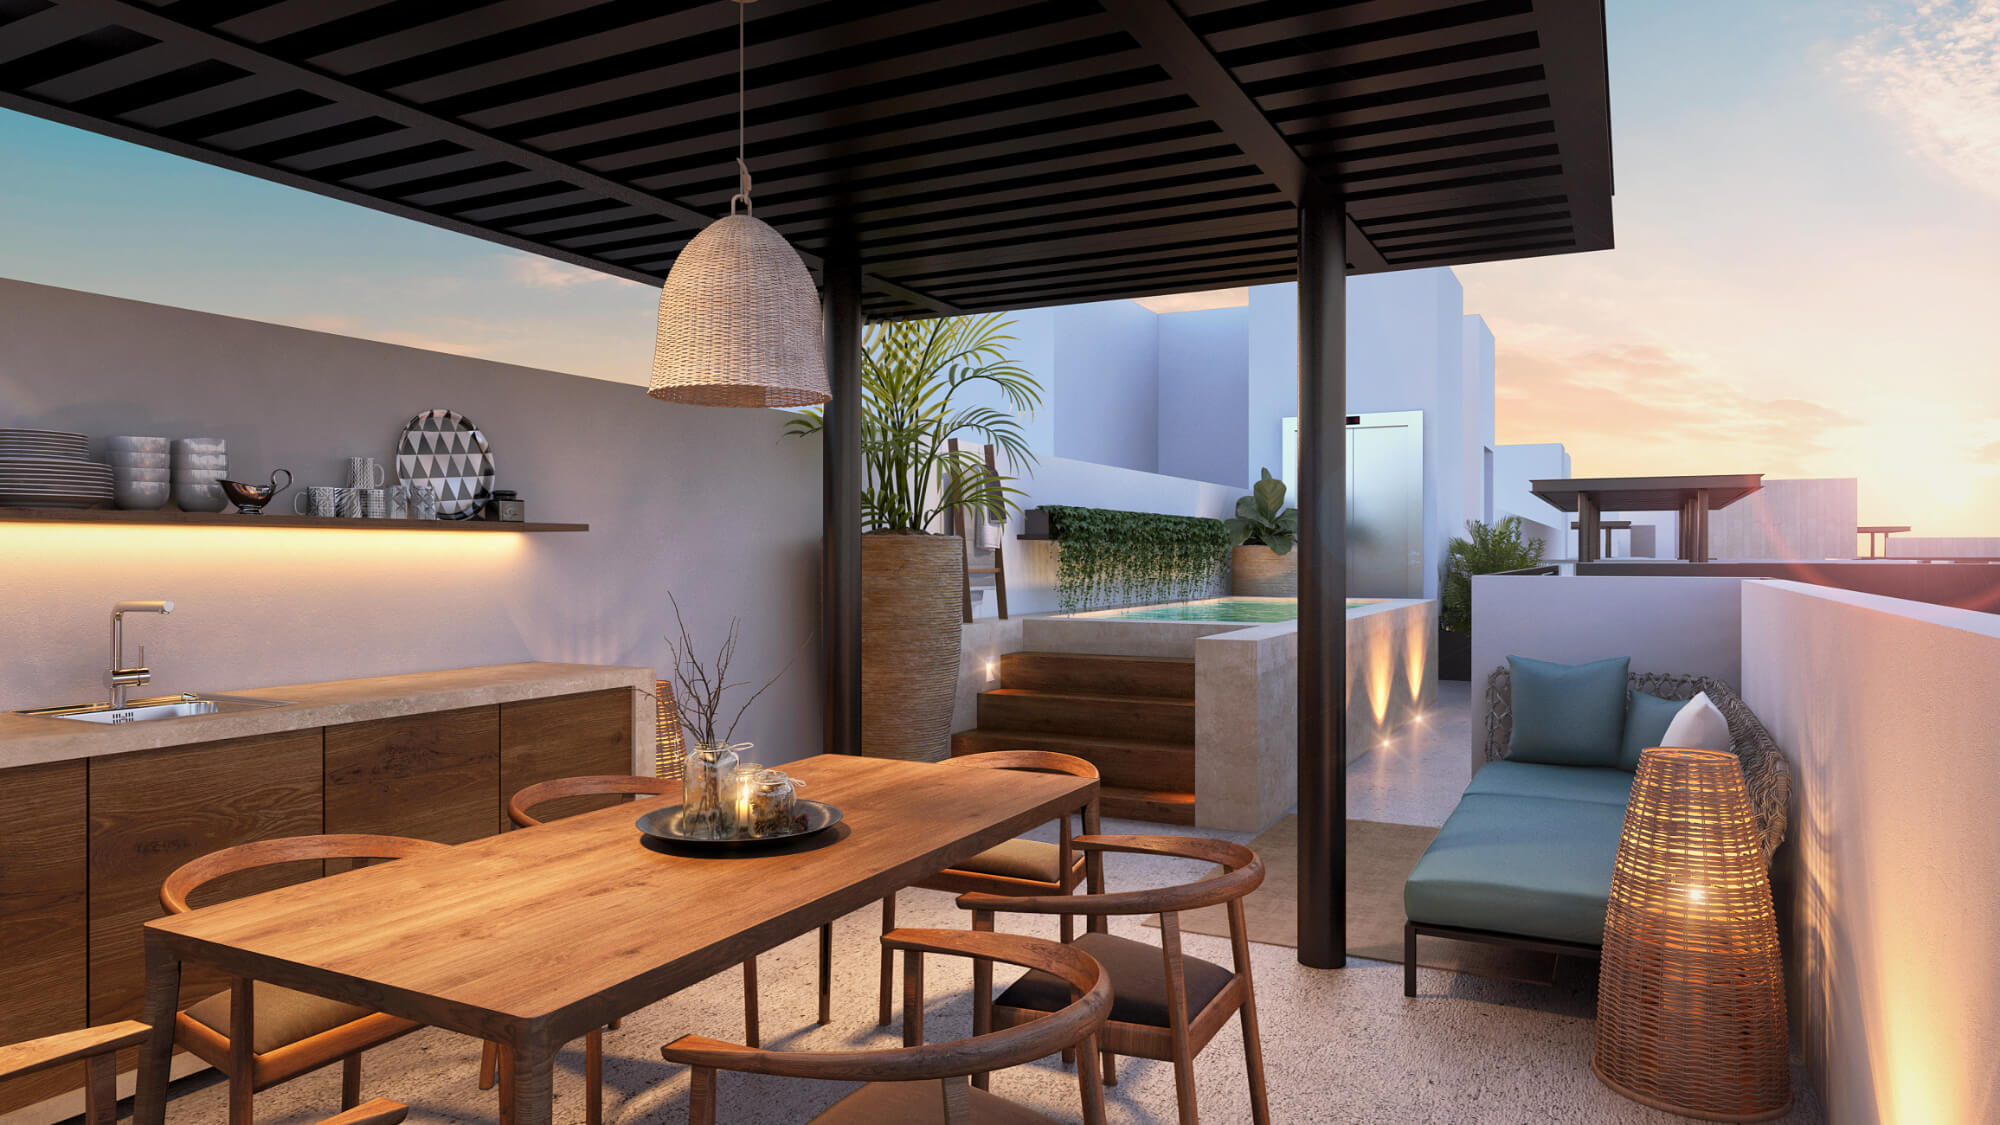 Penthouse with Private Pool, Sauna, Spa and social deck, North Zone, Mérida.